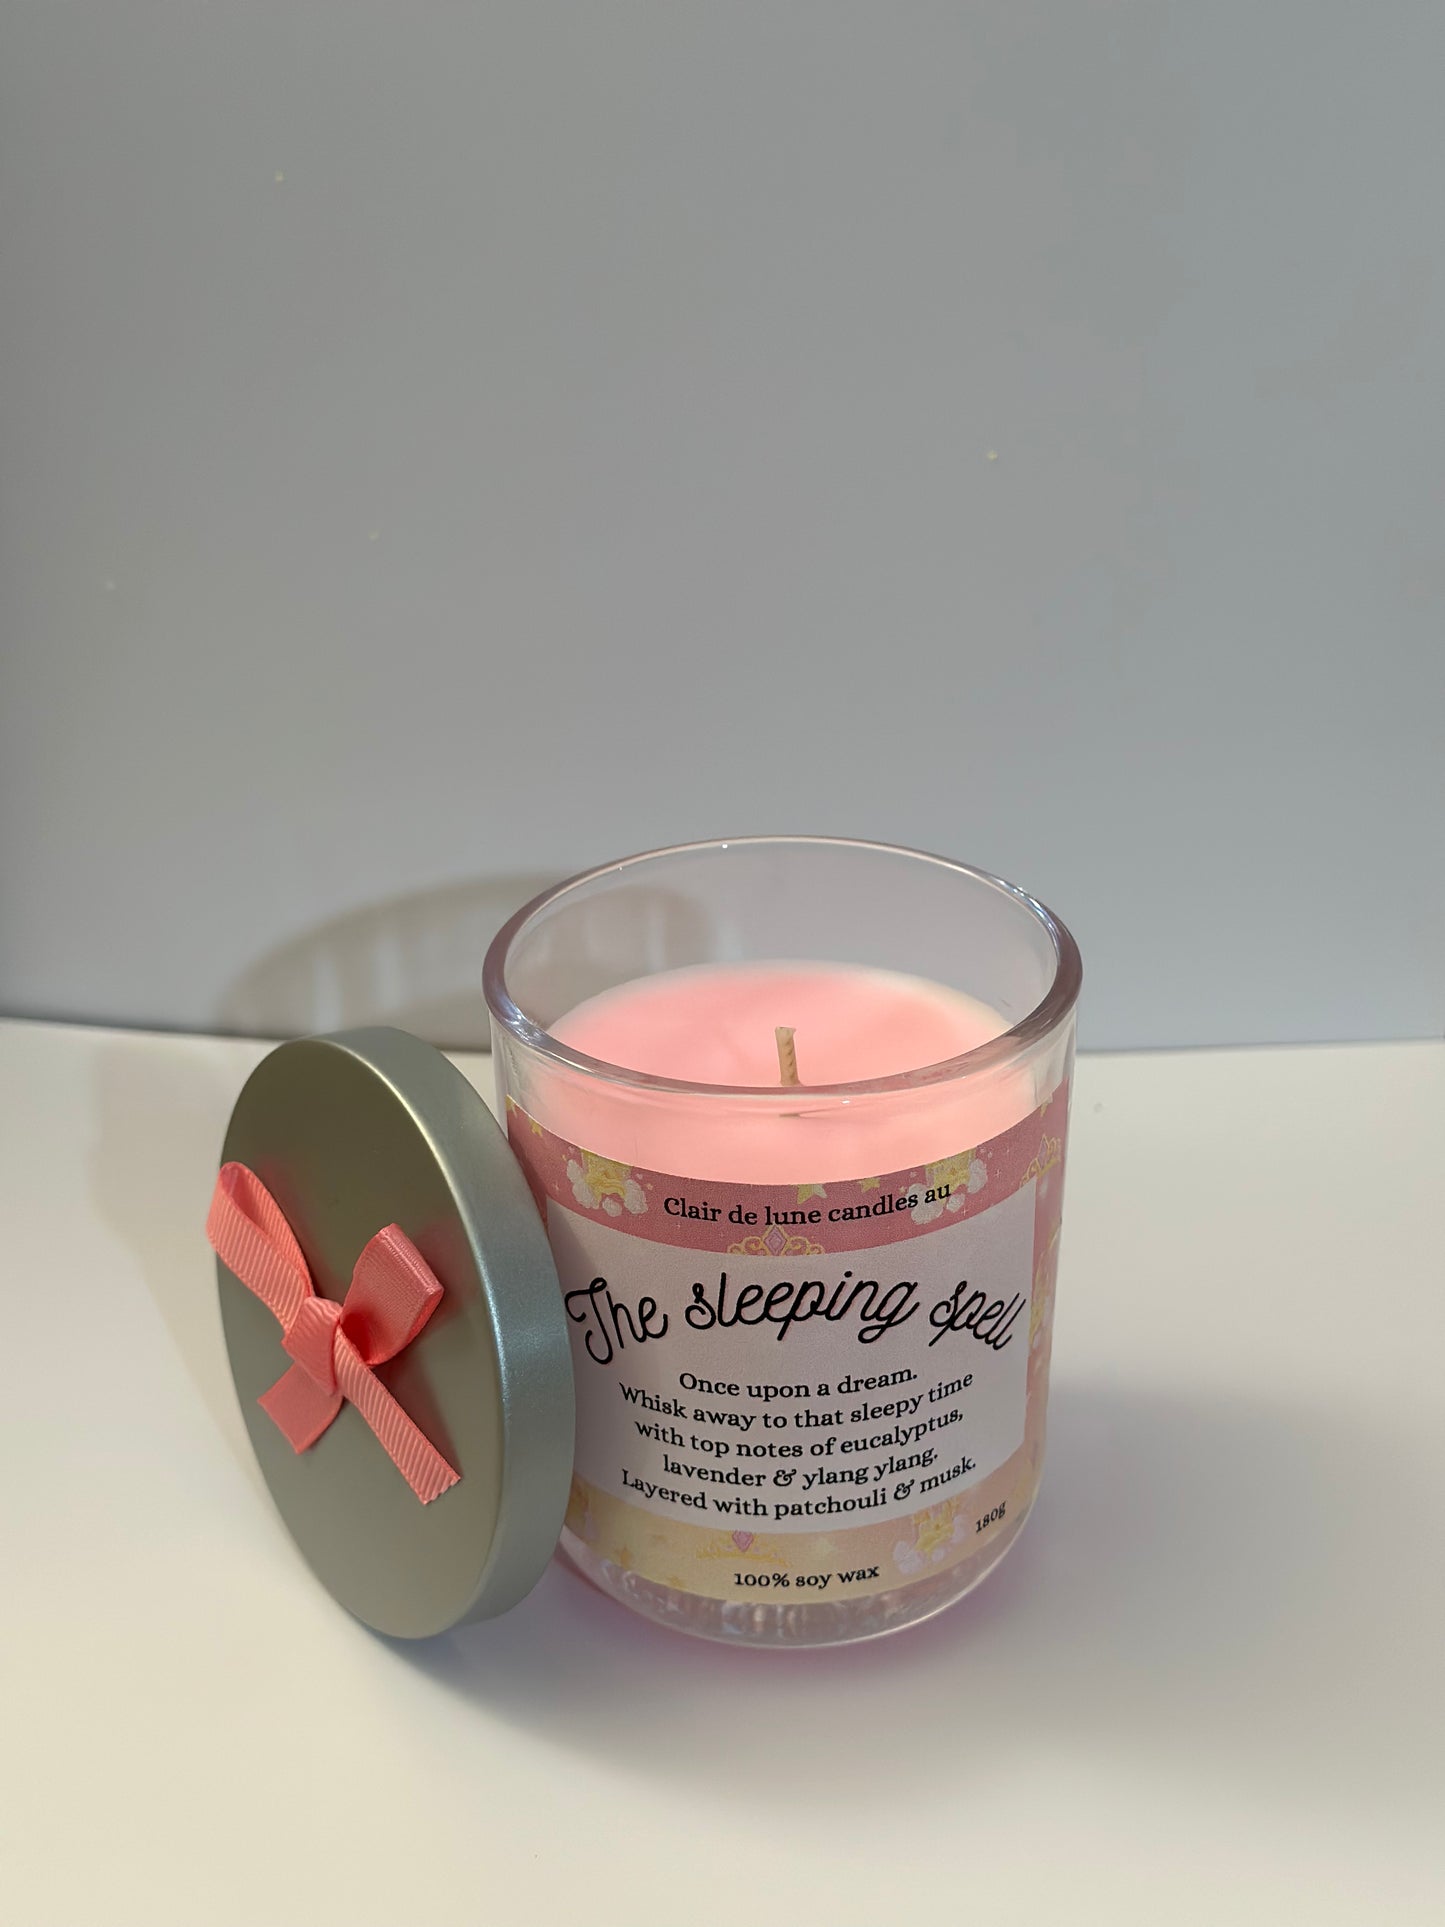 The sleeping spell candle